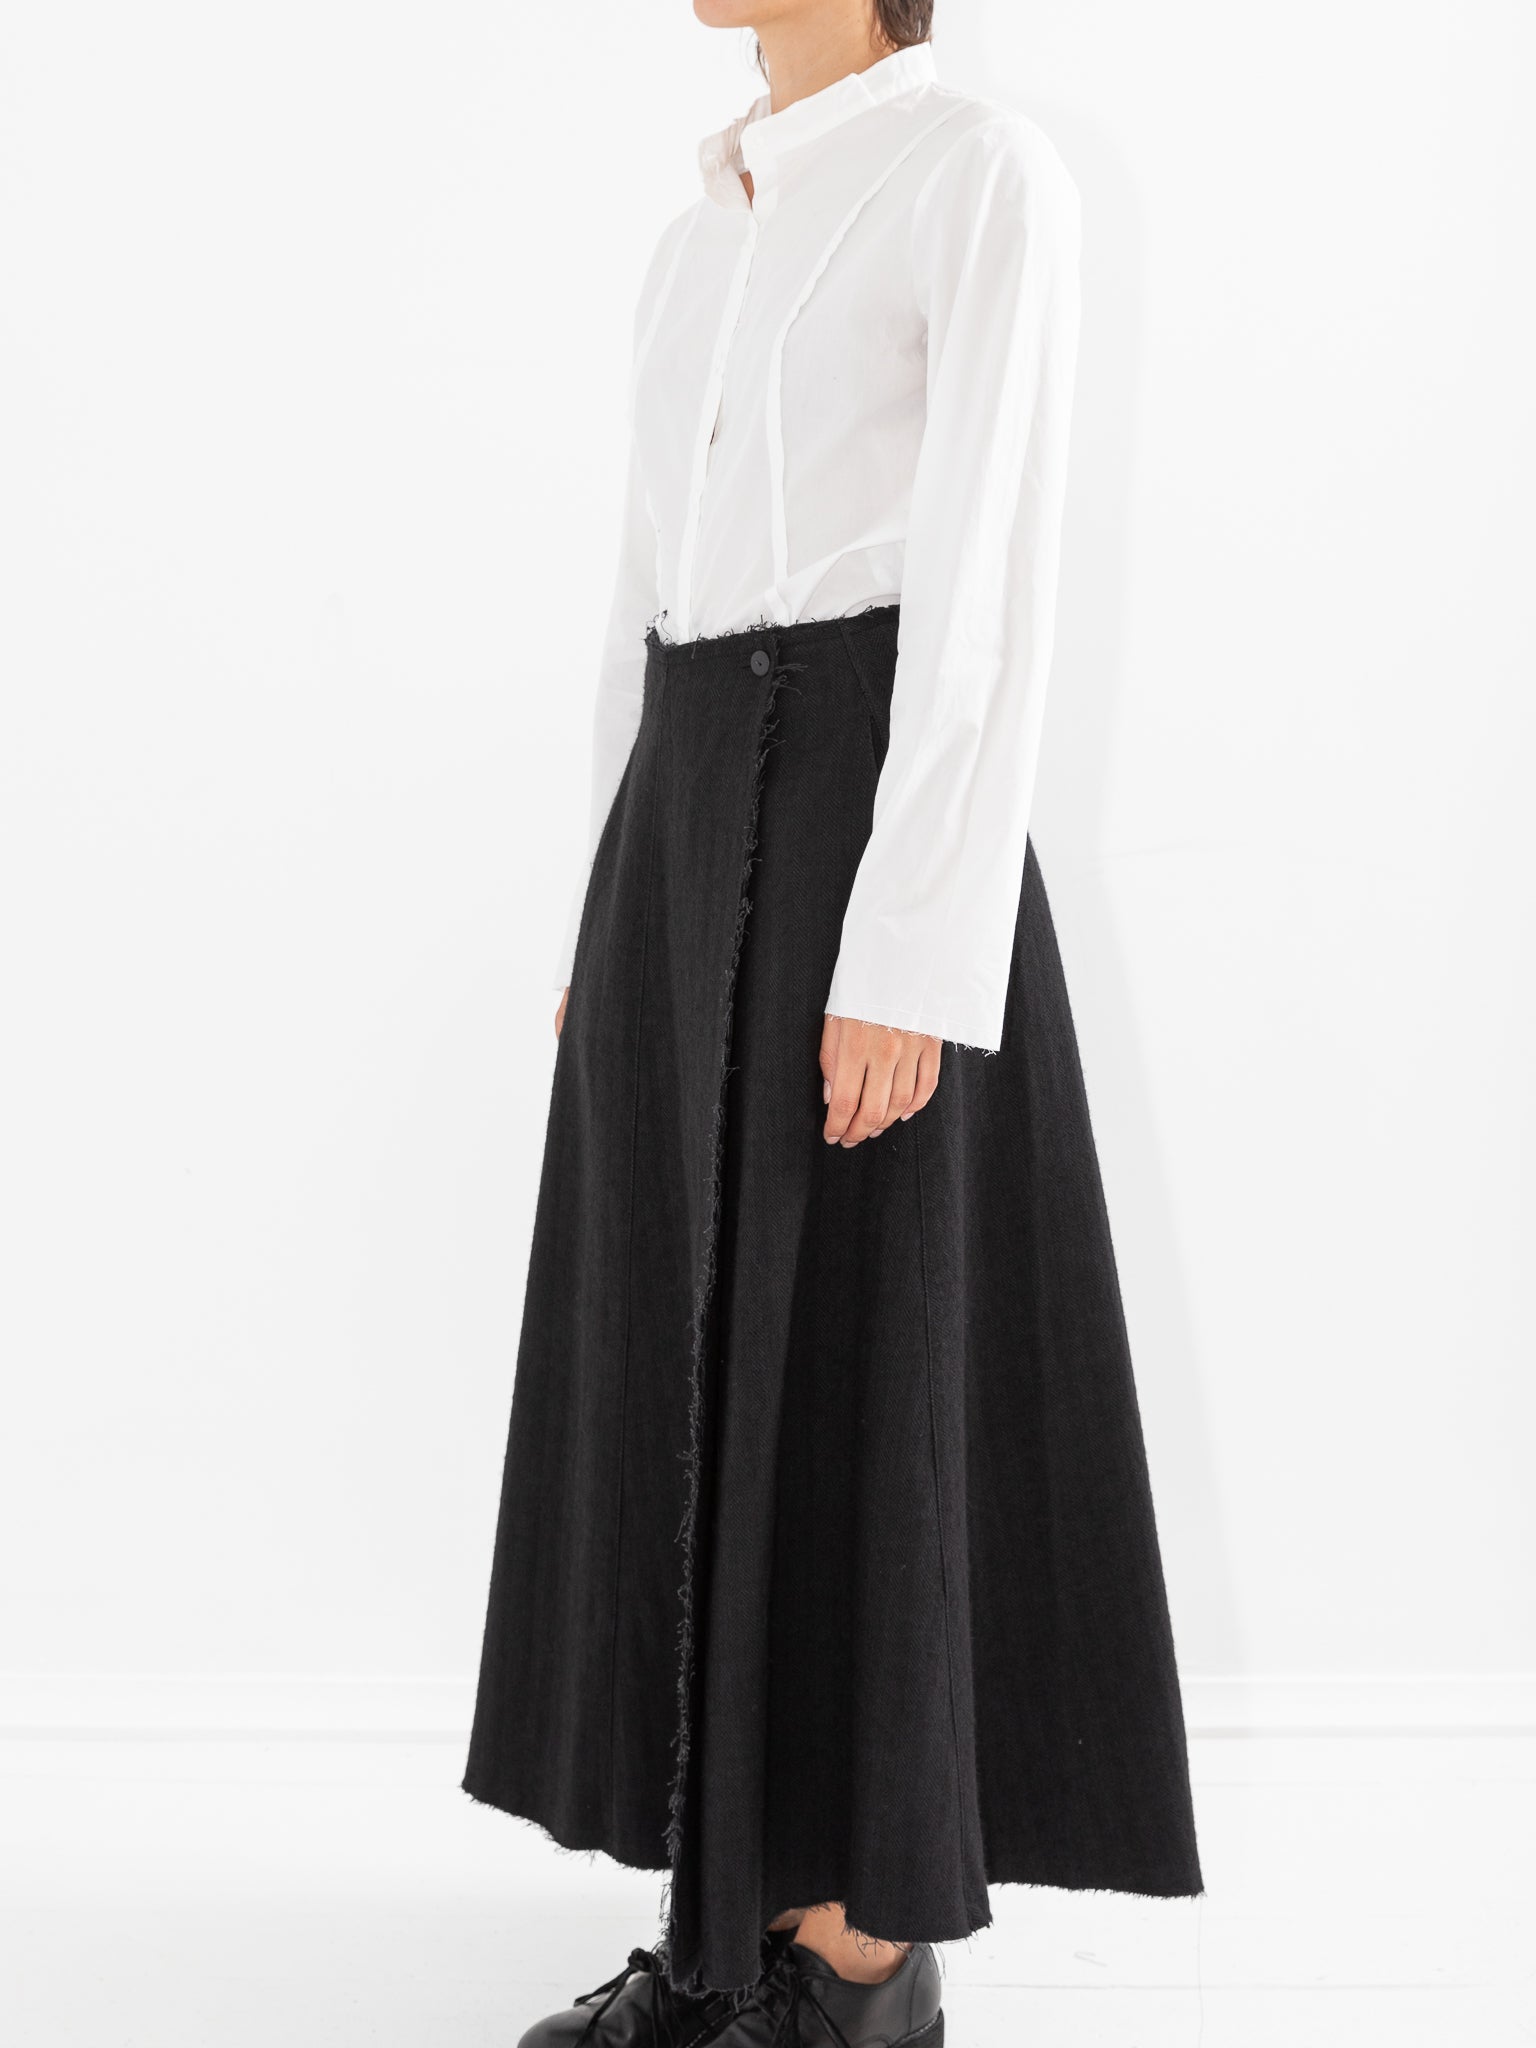 Serie Numerica Doubled Wool Skirt, Black - Worthwhile